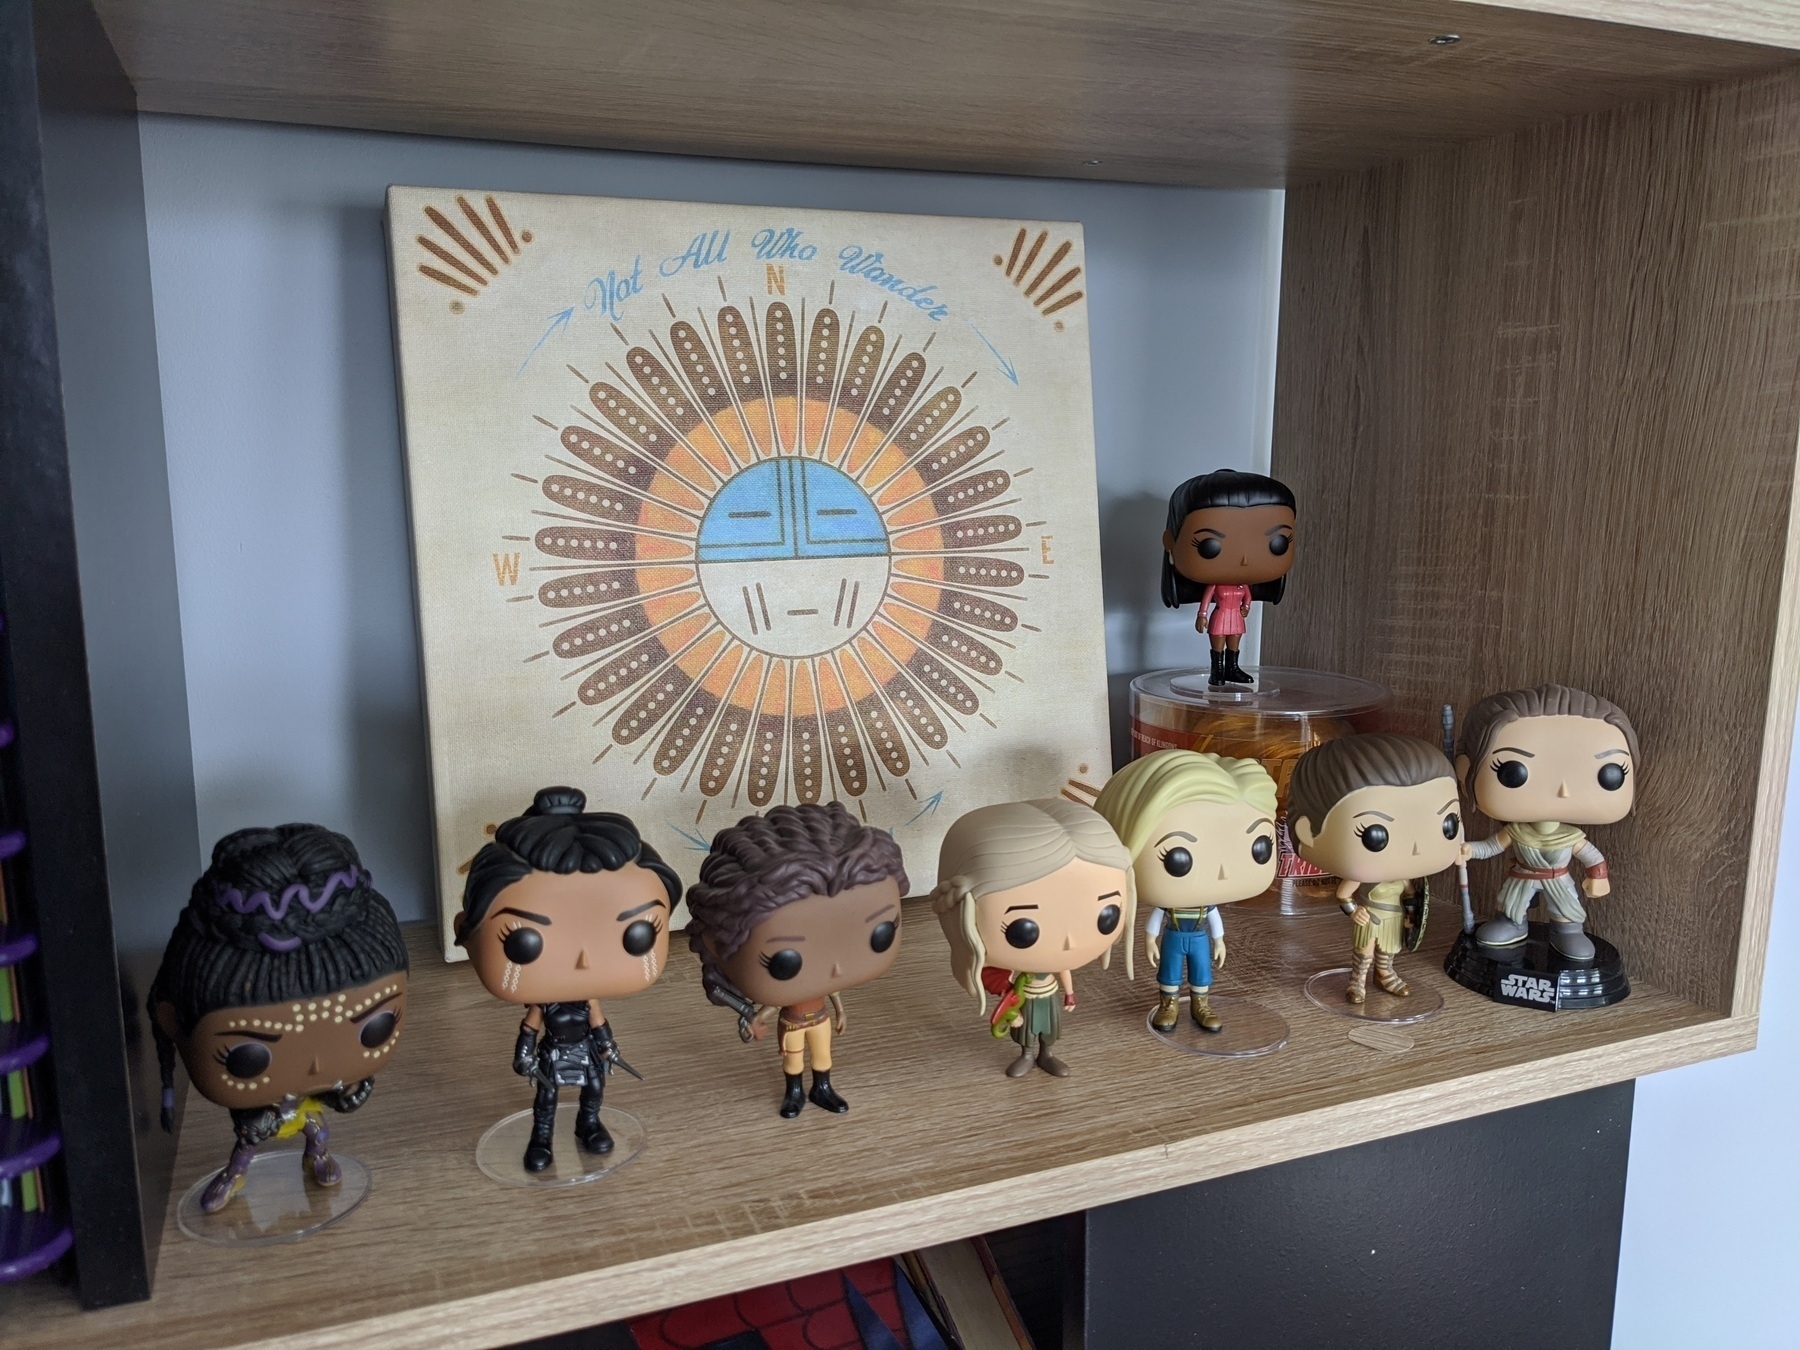 A light colored bookshelf covered in female (super) hero Funko Pops - Front Row, LtoR: Shuri, Valkyrie, Zoe Washburn, Daenerys Targaryen, the 13th Doctor, Wonder Woman, Rey.  Back Row: Lt. Nyota Uhura on top of a Tribble with a tiny Captain Kirk. There is a square canvas with a stylized sun and the phrase “Not all who wander are lost”.